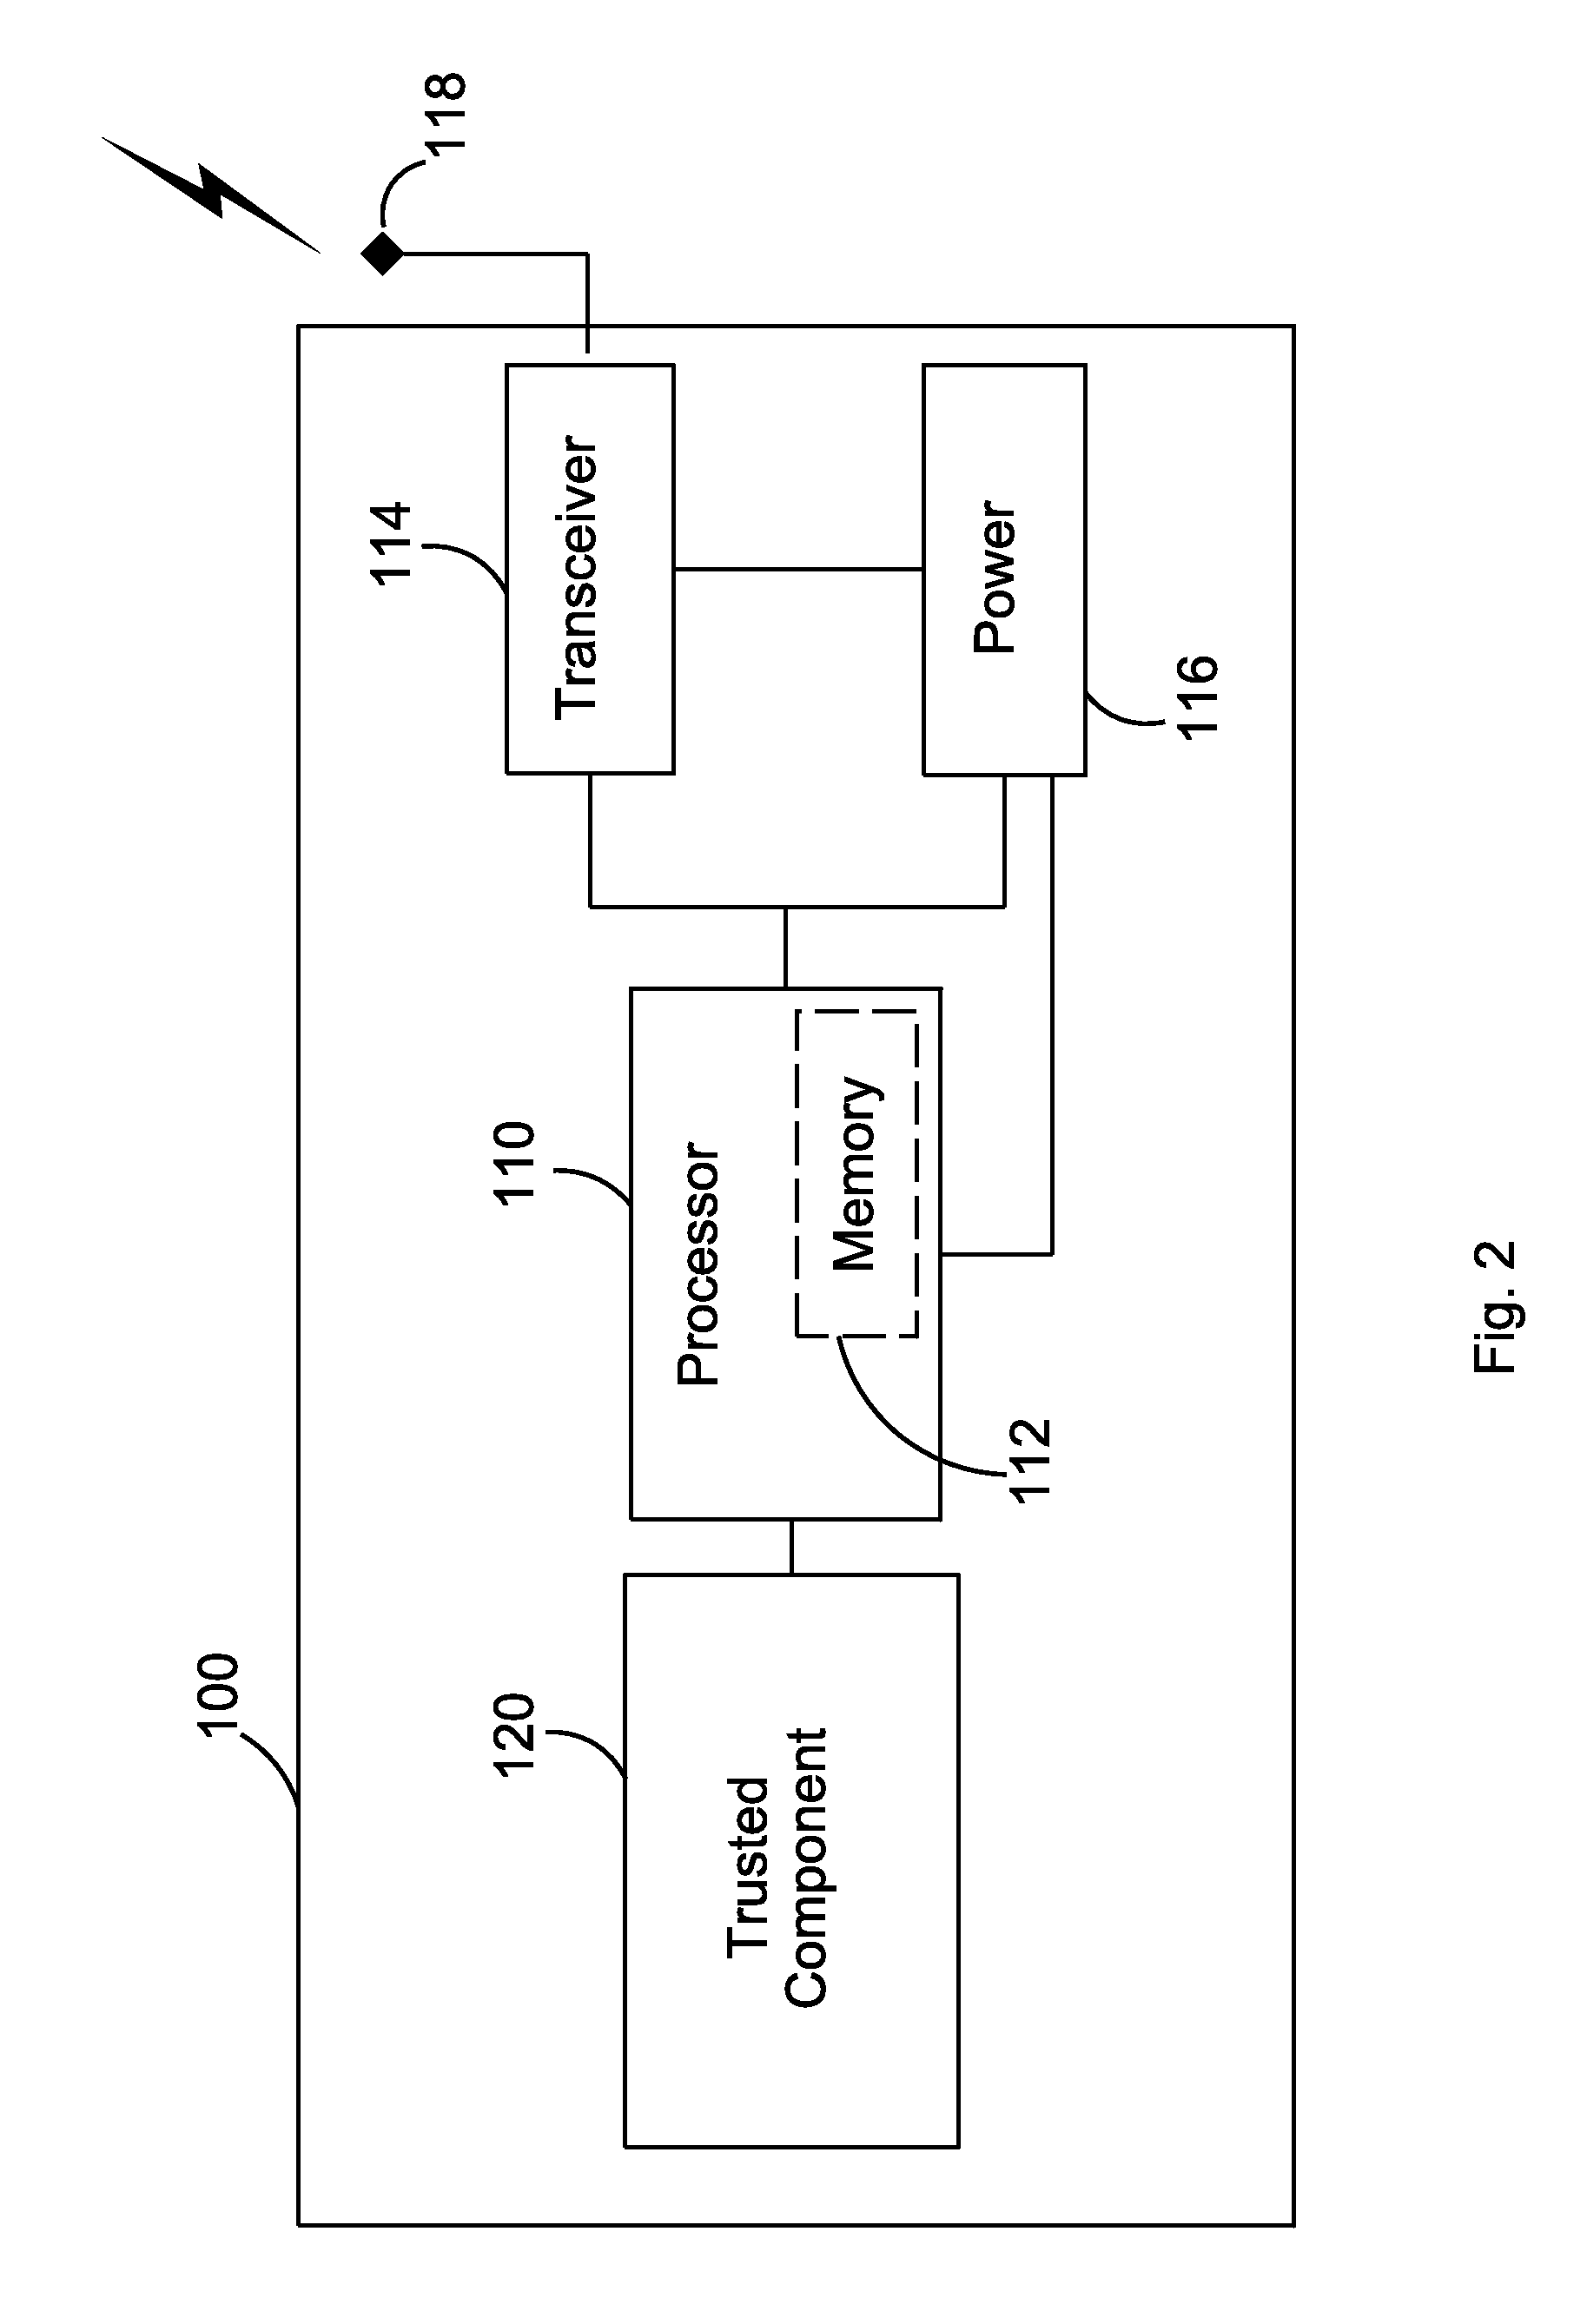 Validation And/Or Authentication Of A Device For Communication With Network